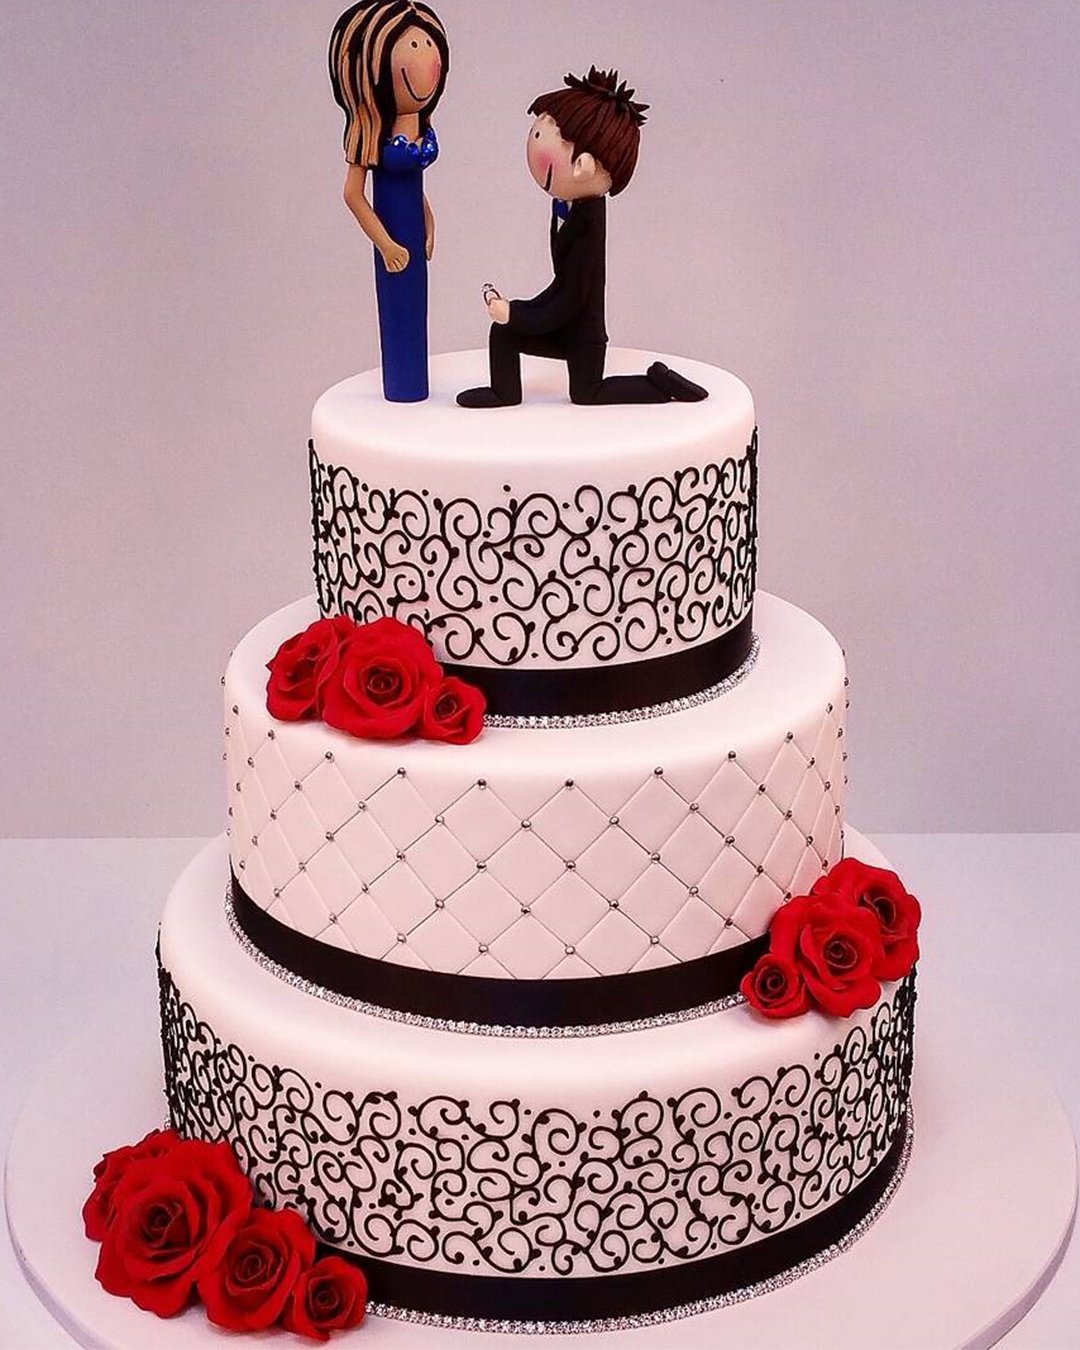 black and white wedding cakes minimalistic black and white cakesblack and white wedding cakes wedding cakes with flowers ideas